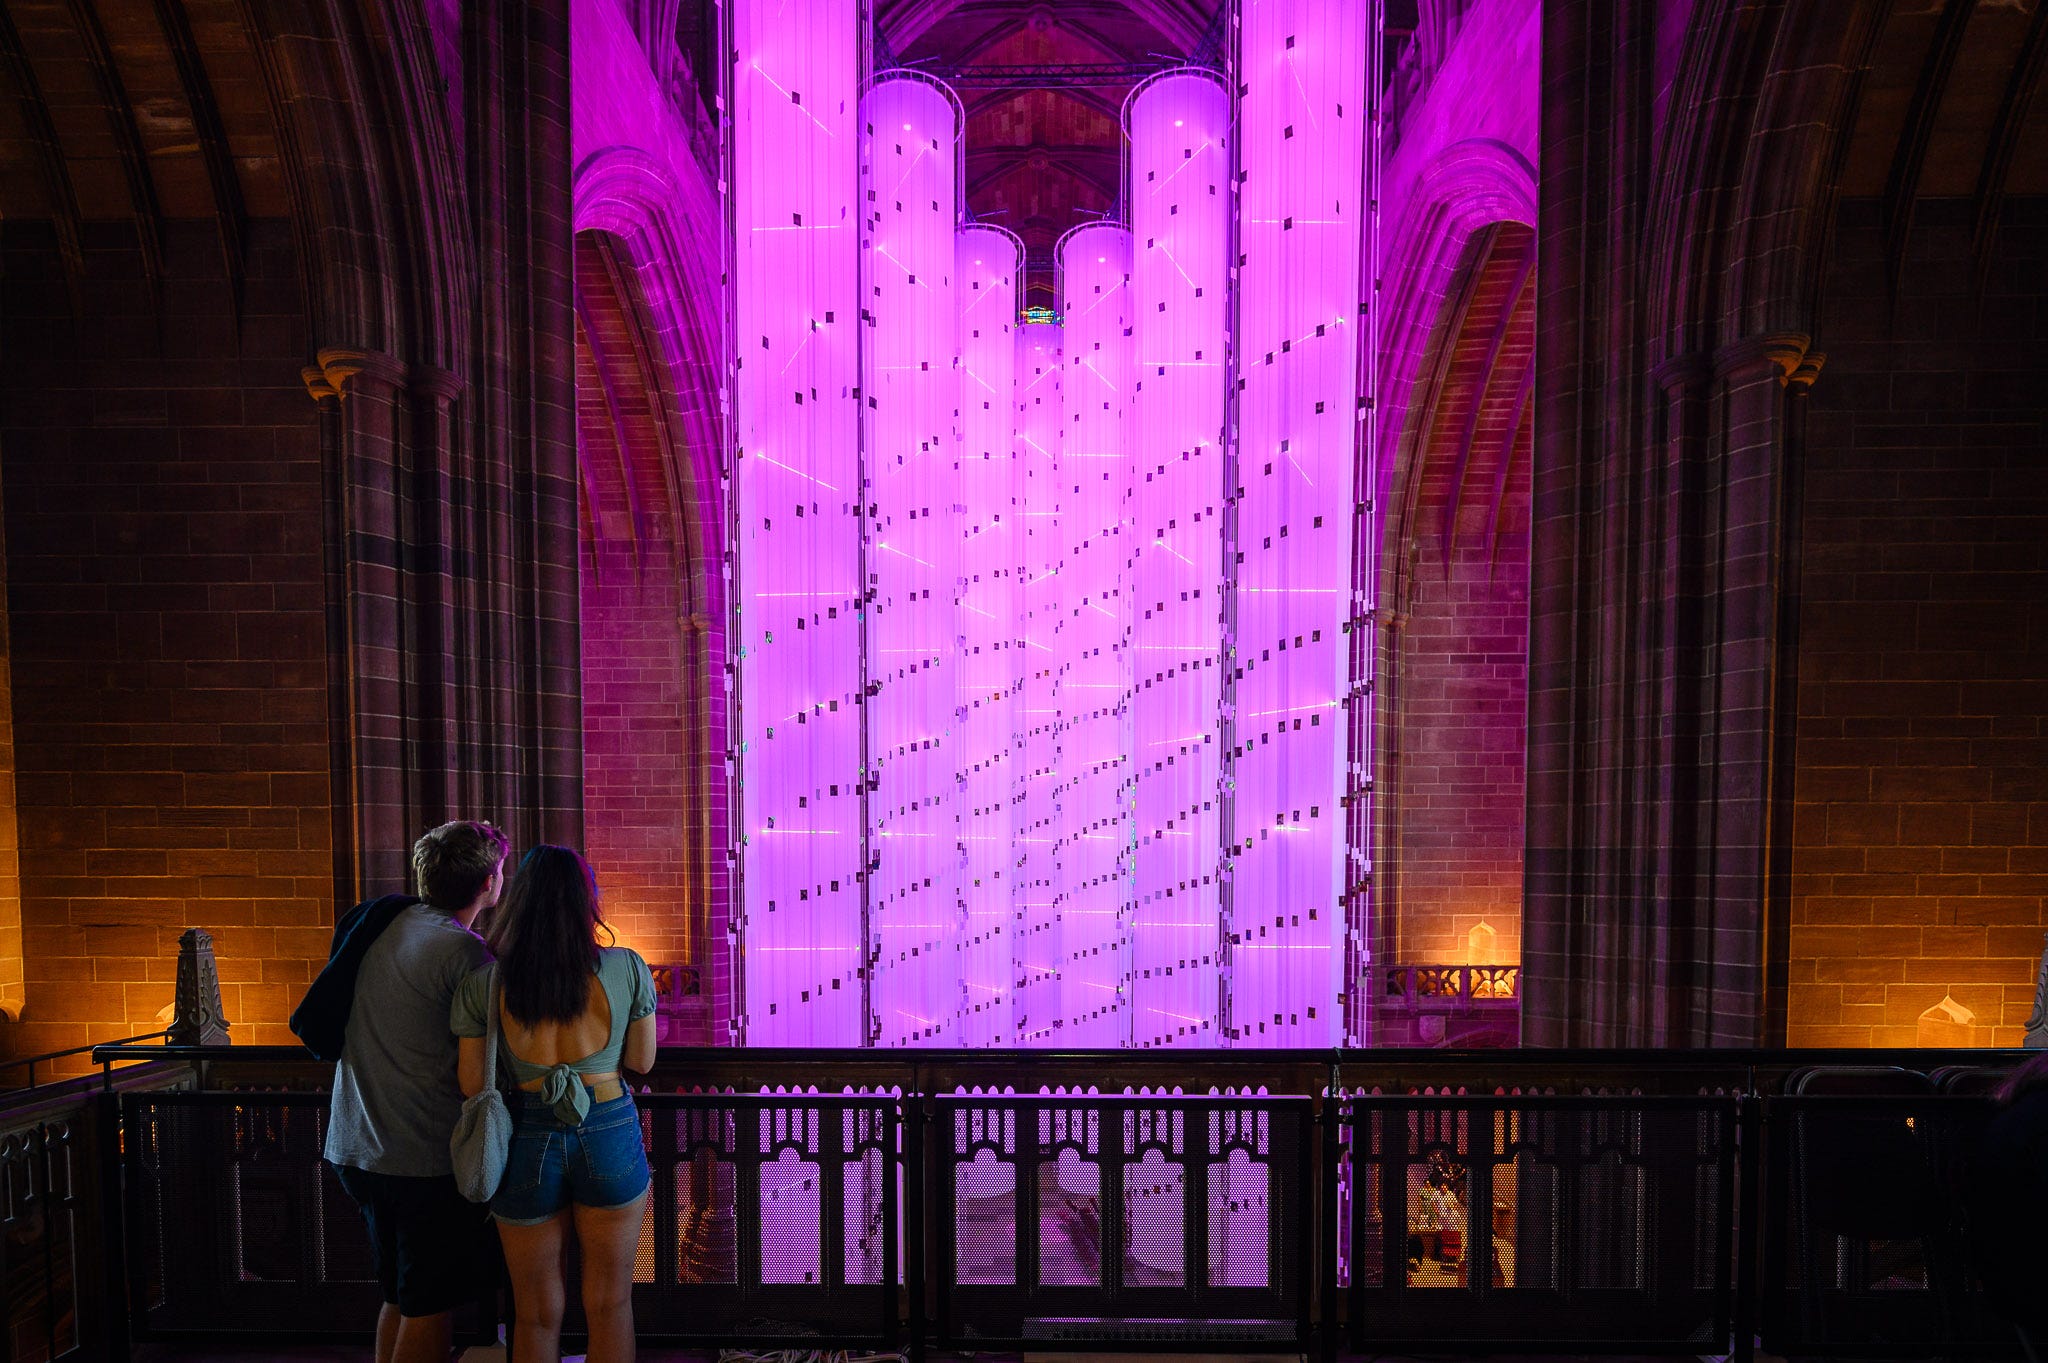 A couple look at the pink columns of light from the elevated vantage point.